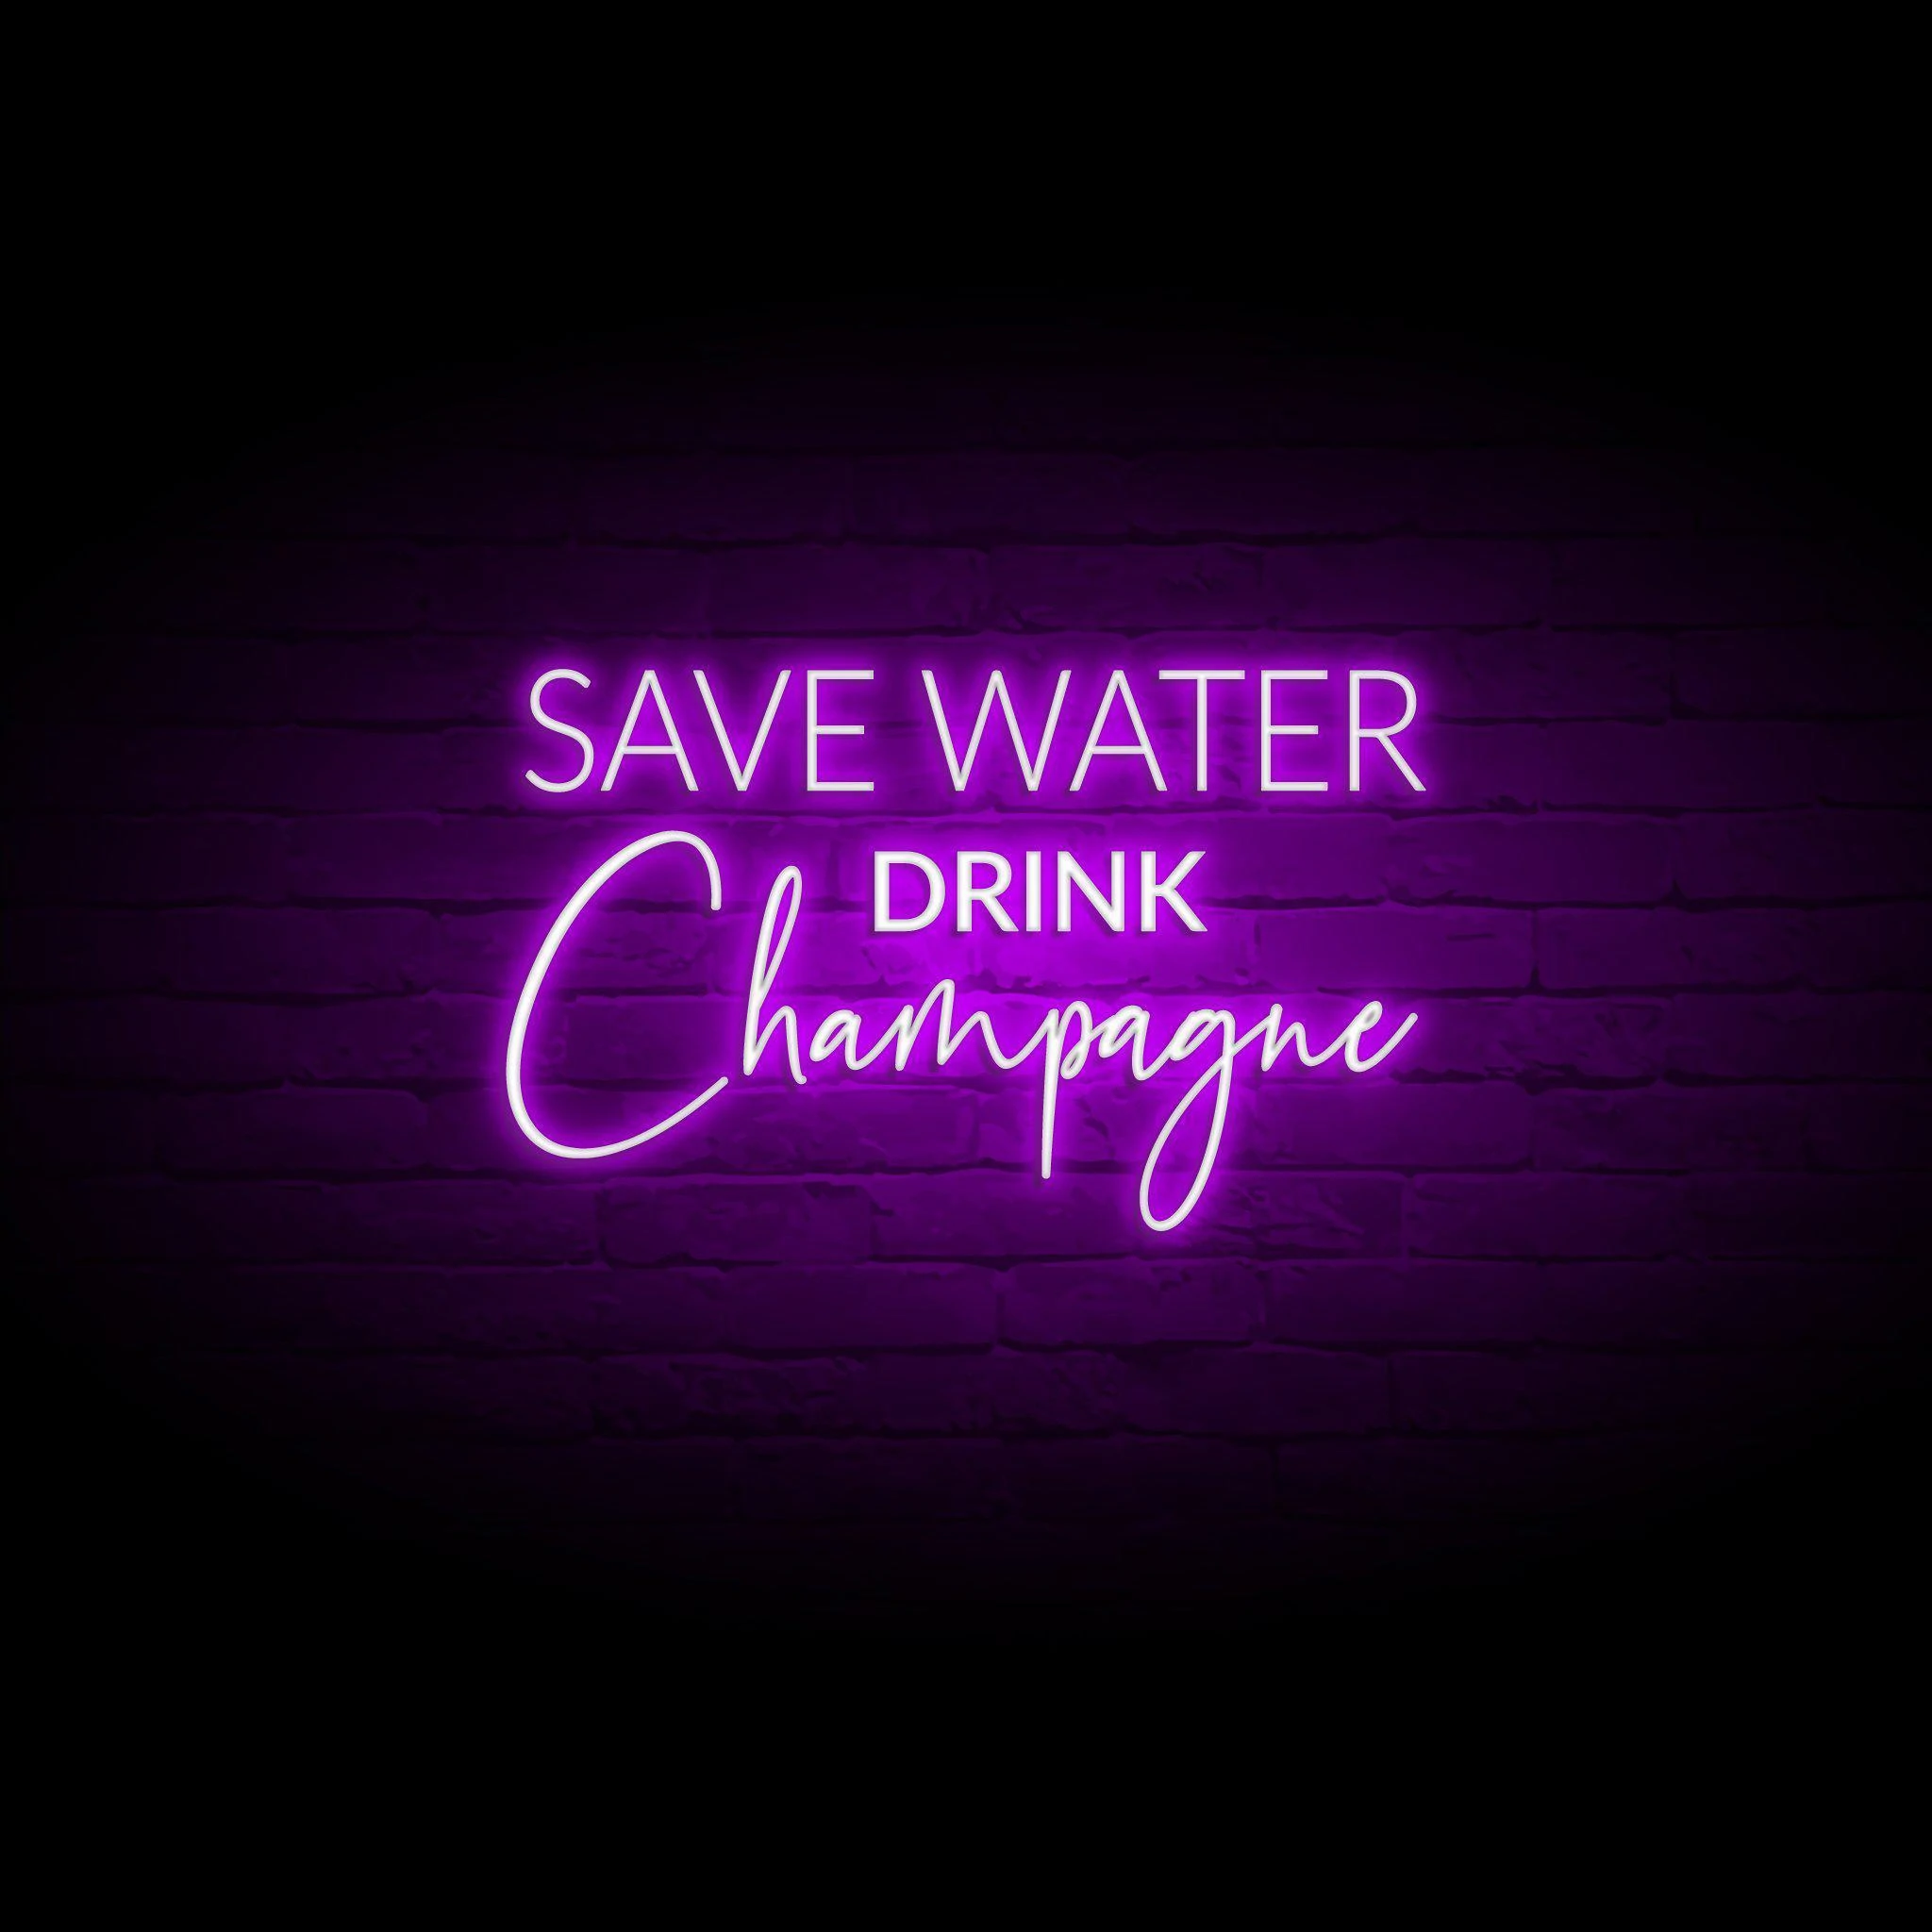 'SAVE WATER, DRINK CHAMPAGNE' NEON SIGN